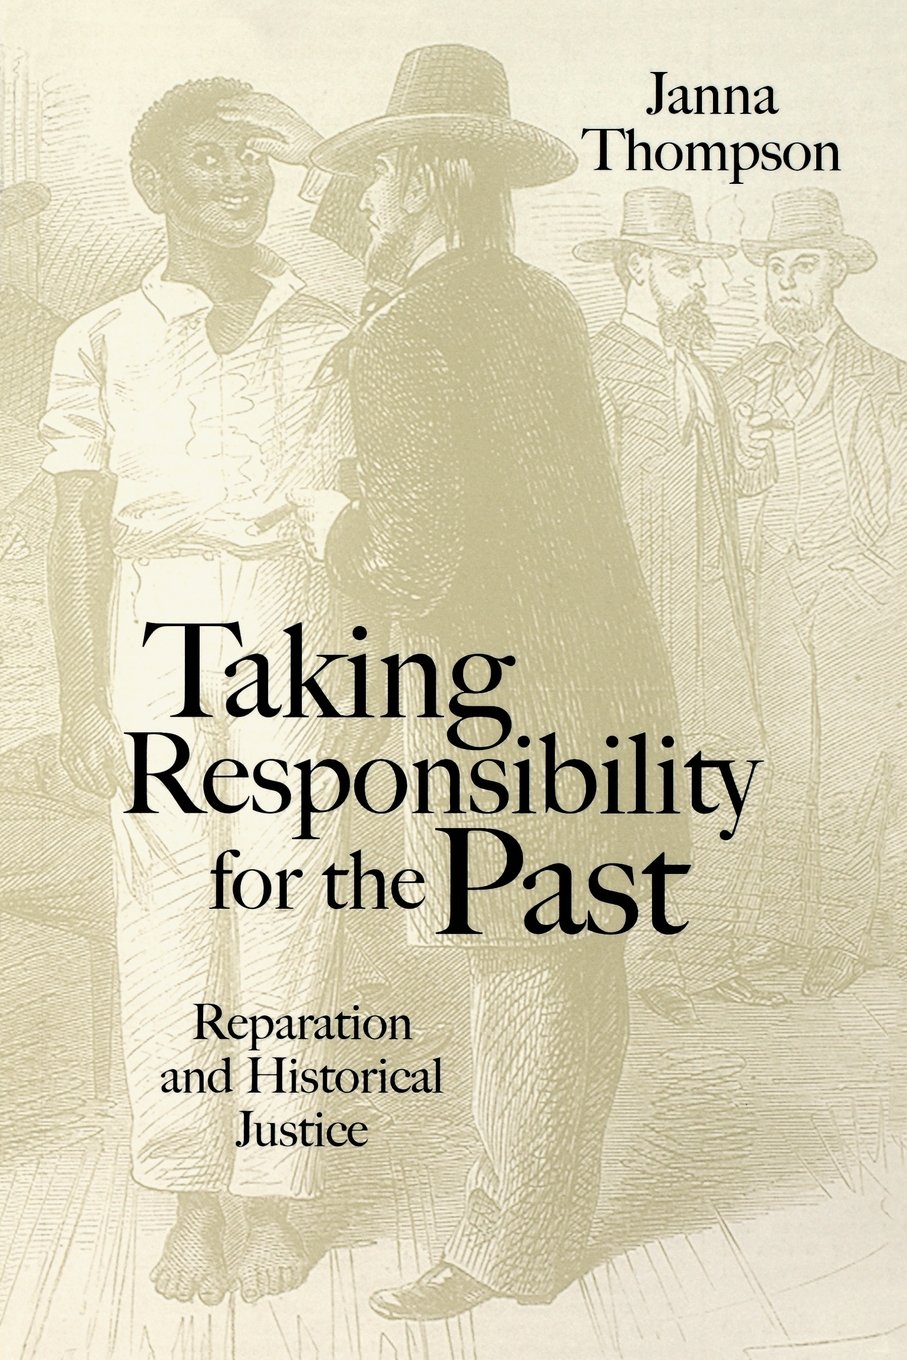 Taking Responsibility for the Past: Reparation and Historical Injustice